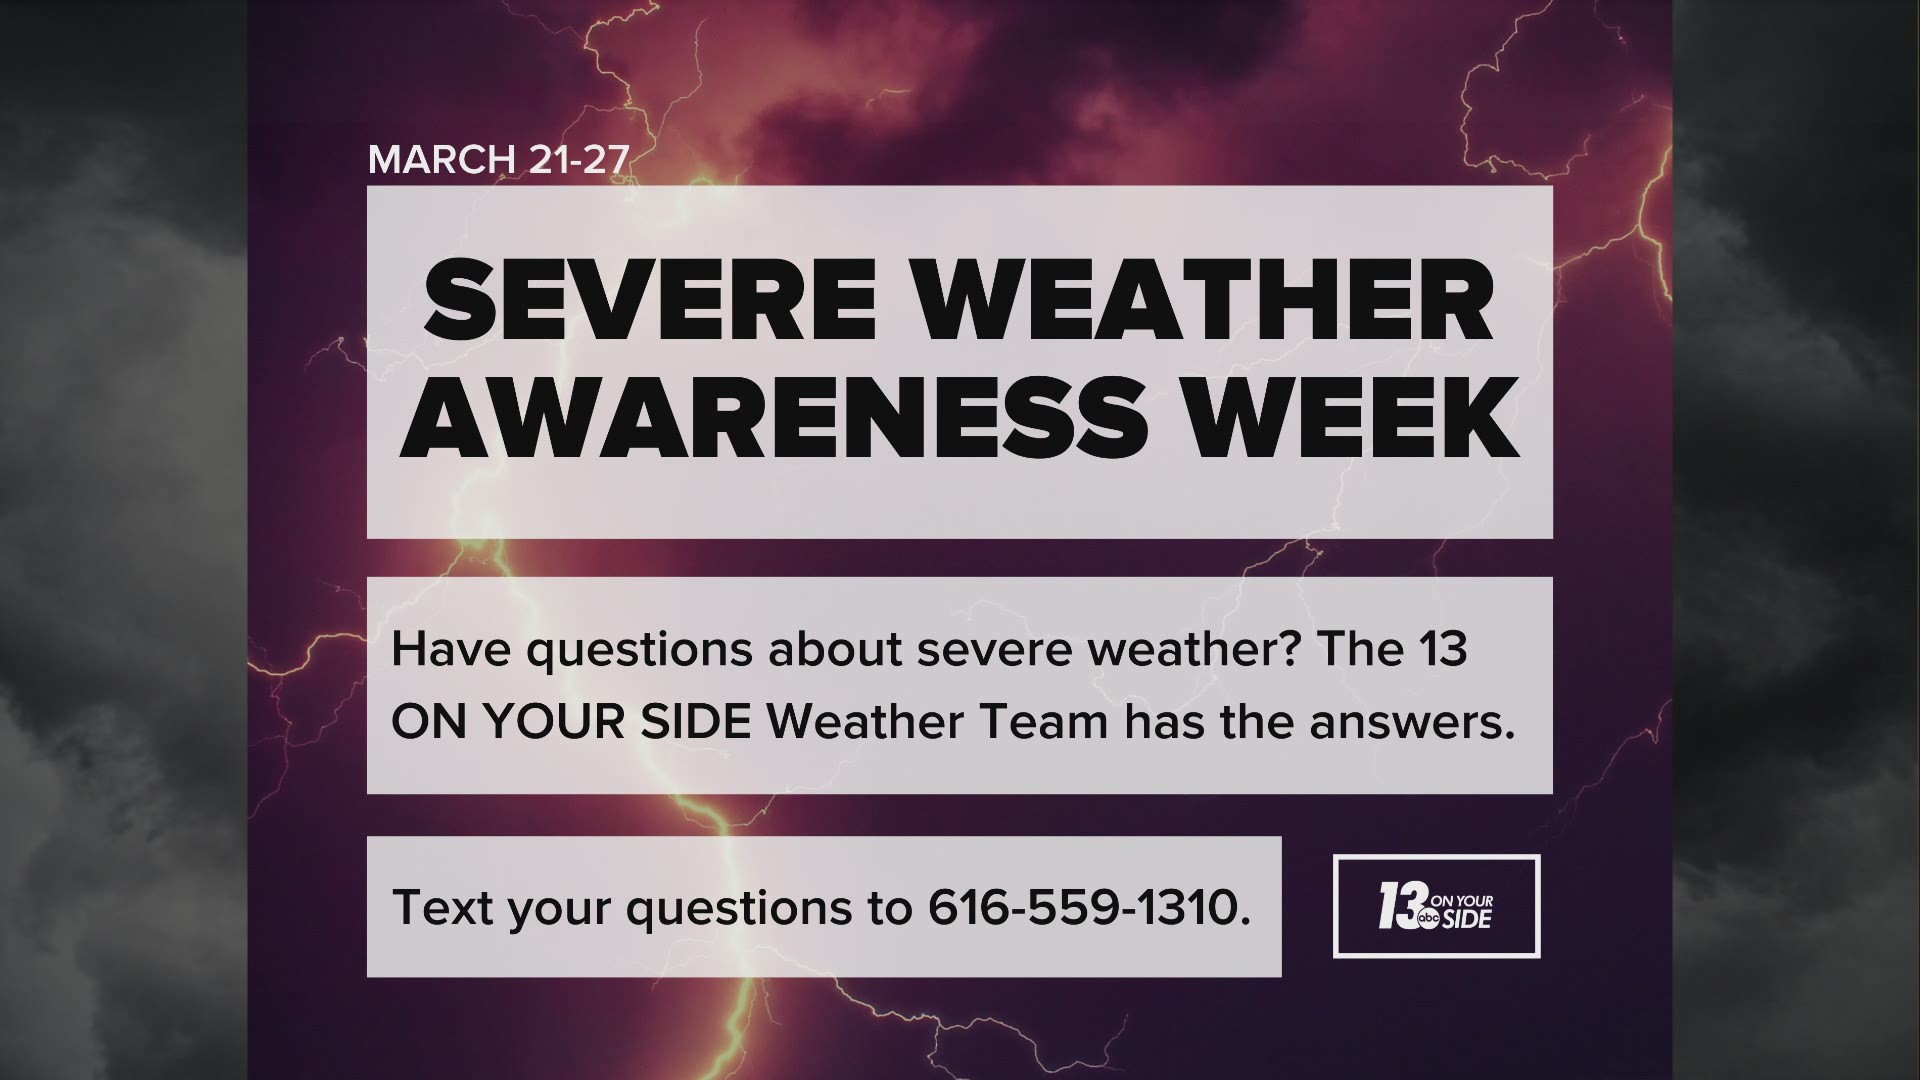 This outbreak Is a reminder us that with Spring officially arriving on Saturday, it's time to switch gears from winter preparedness to severe weather readiness.